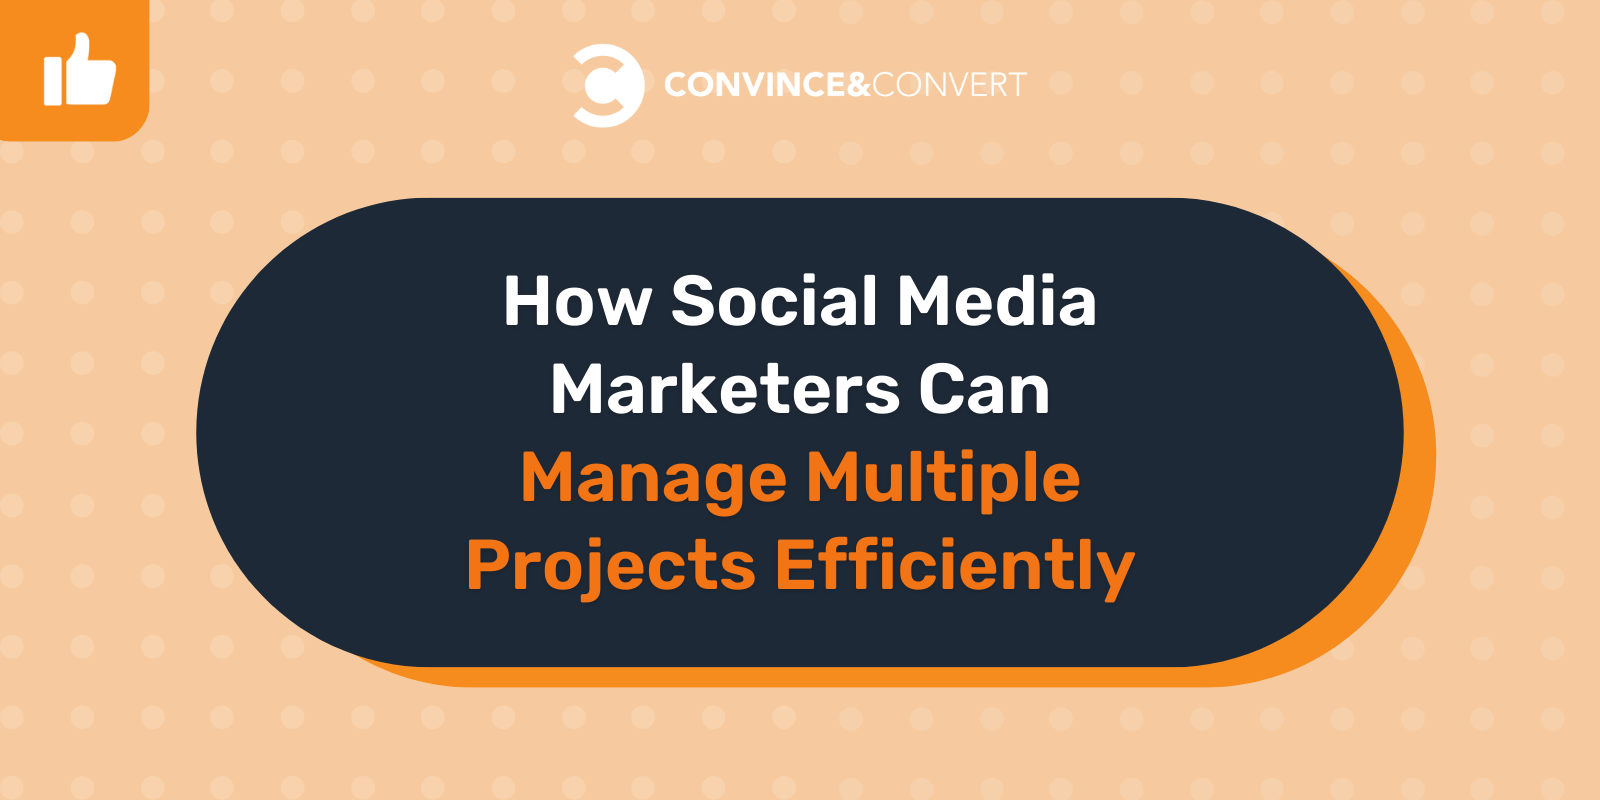 How Social Media Marketers Can Manage Multiple Projects Efficiently